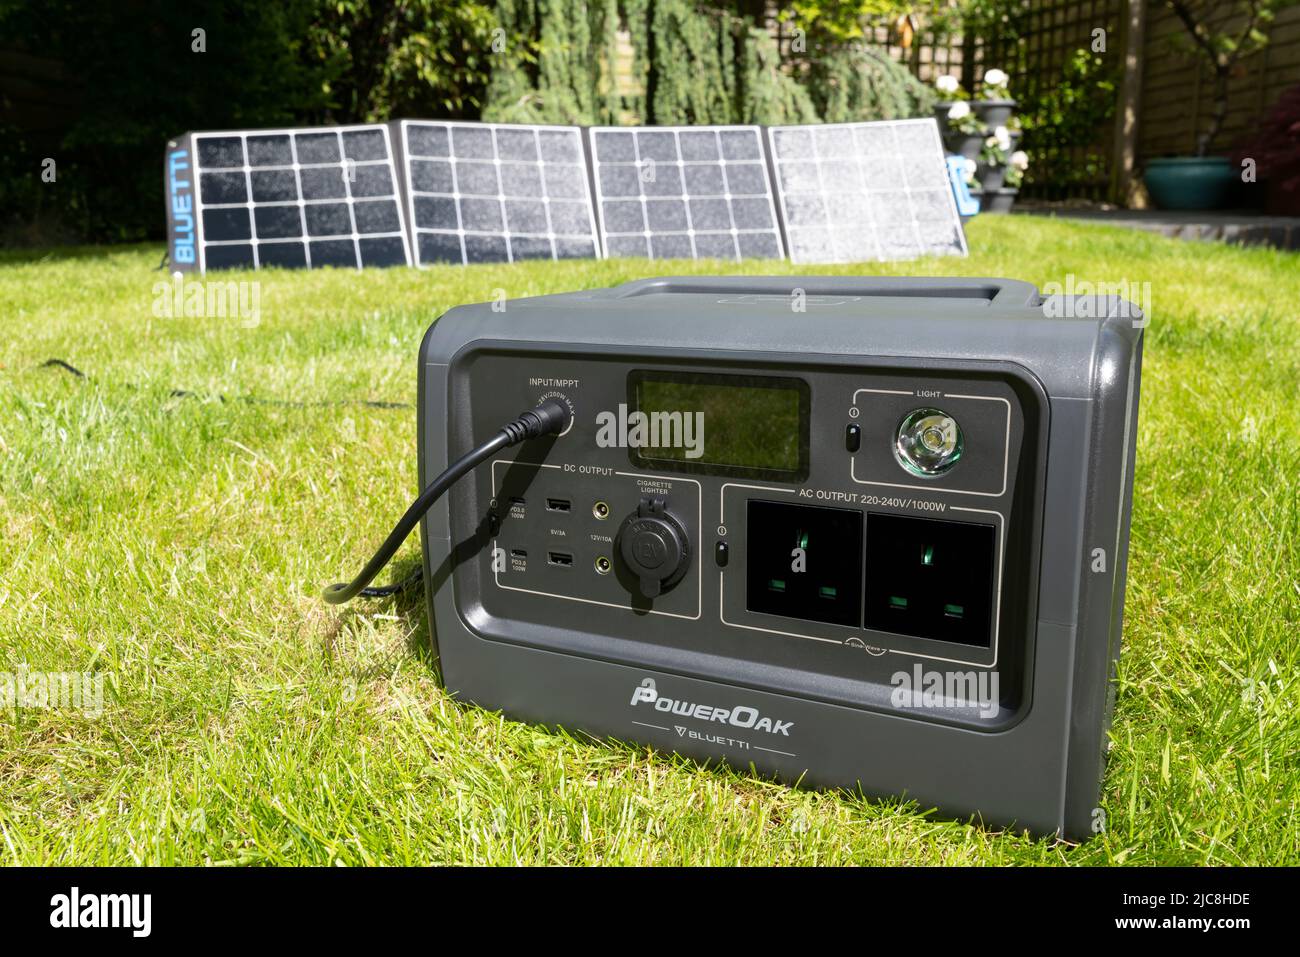 Solar powered battery power station converting the sun's energy into electric power. Stock Photo